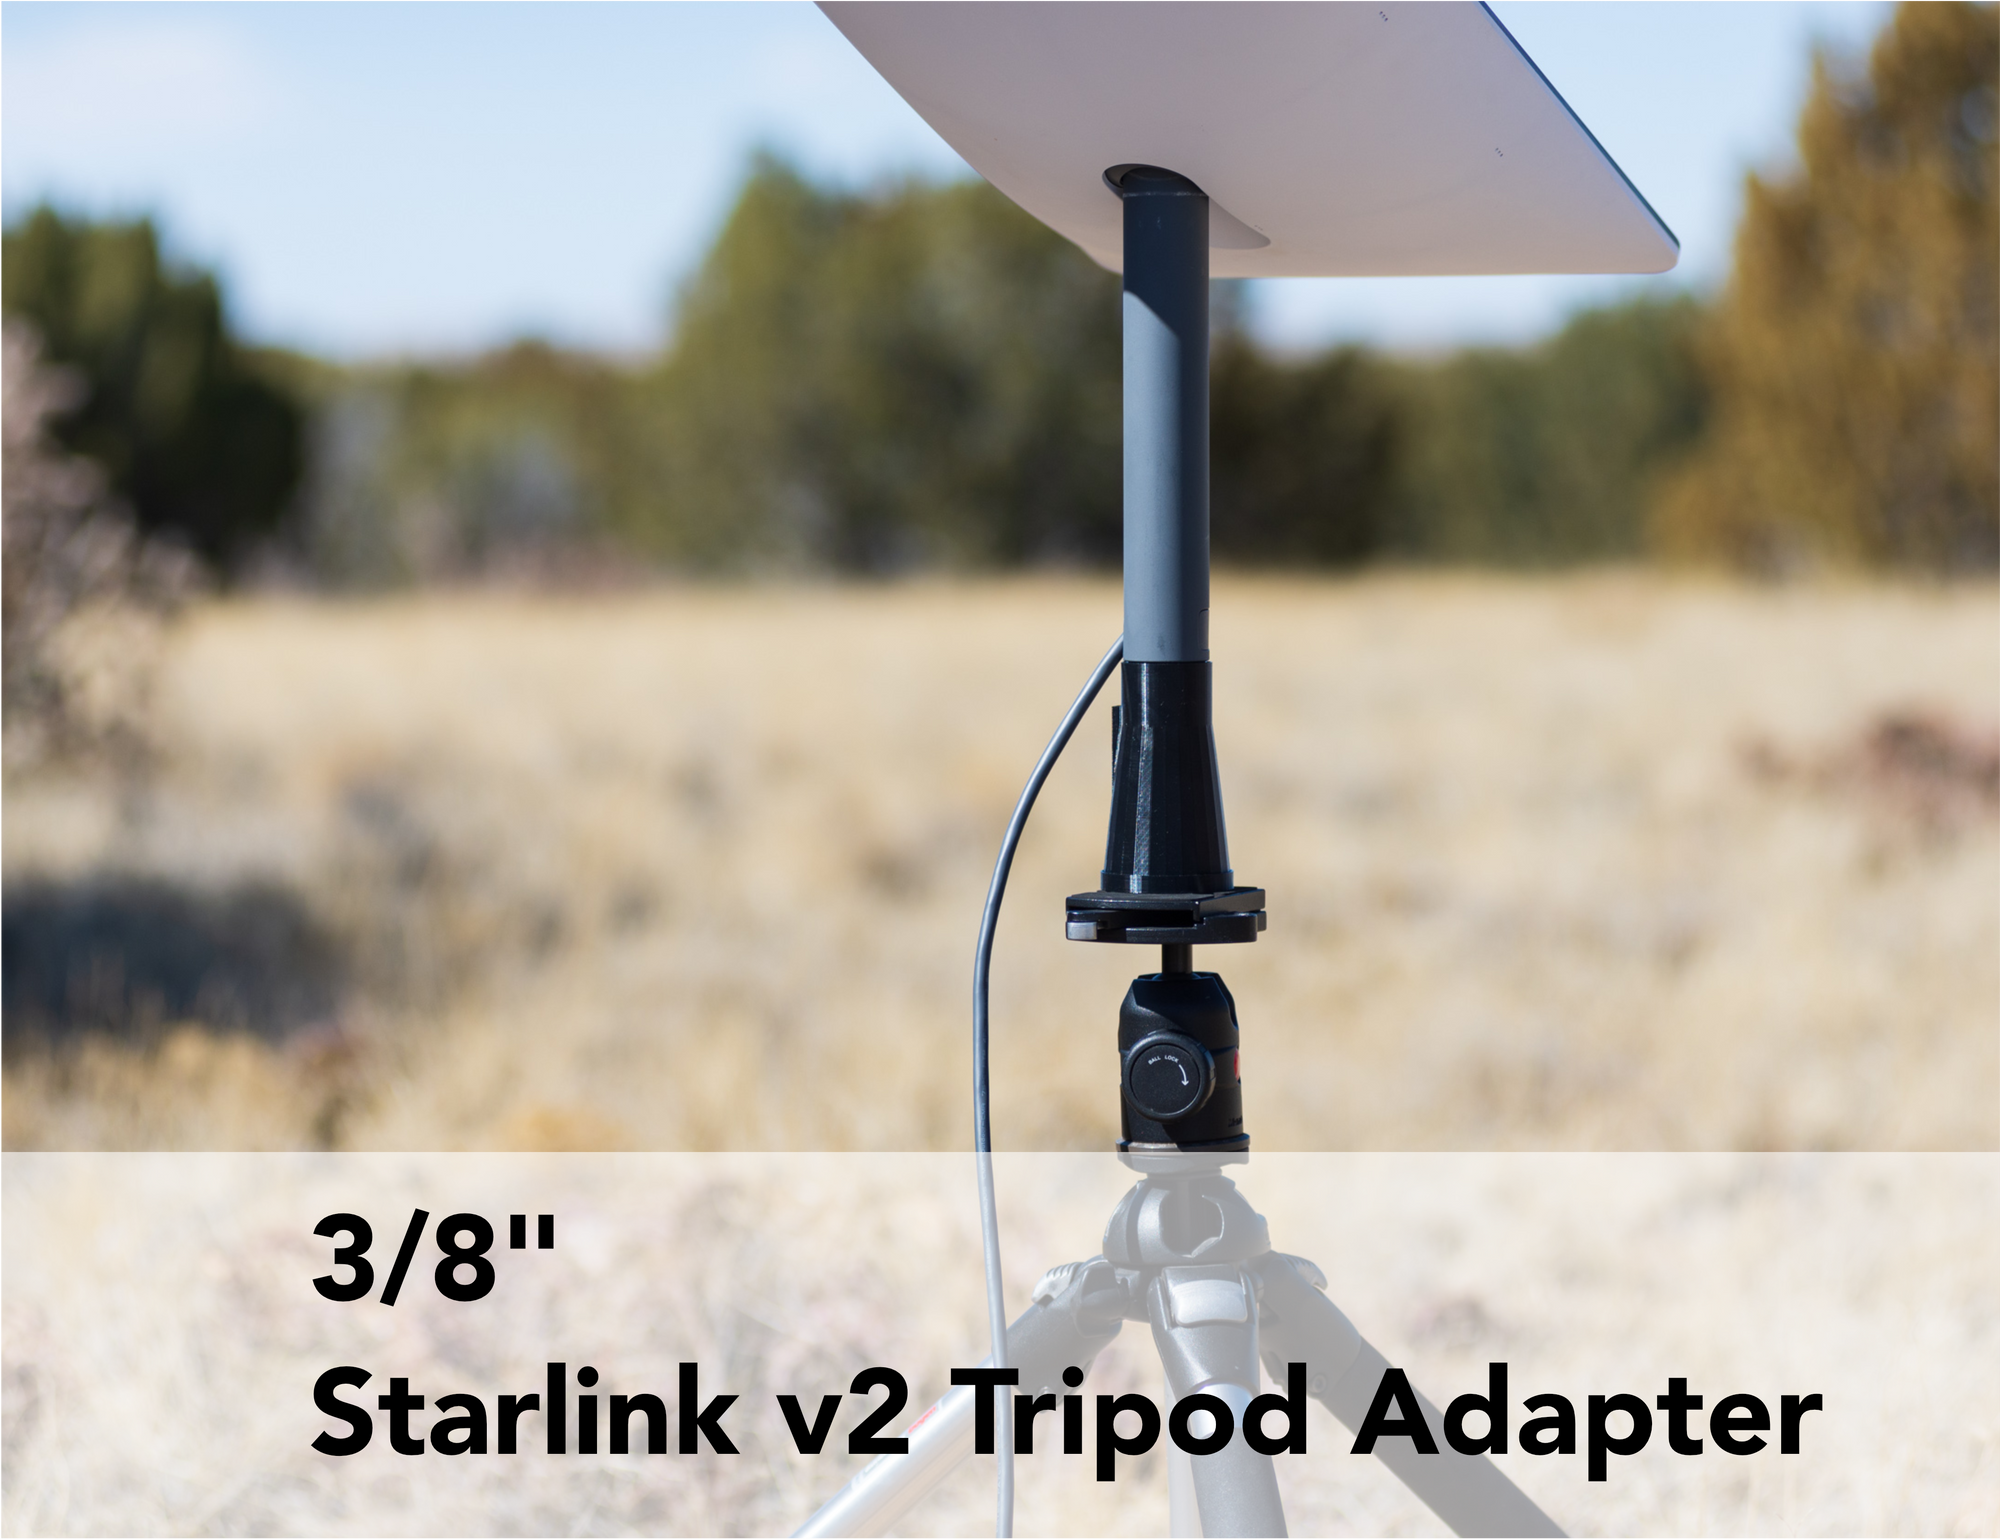 Choosing The Best Starlink Tripod Adapter for Your Needs